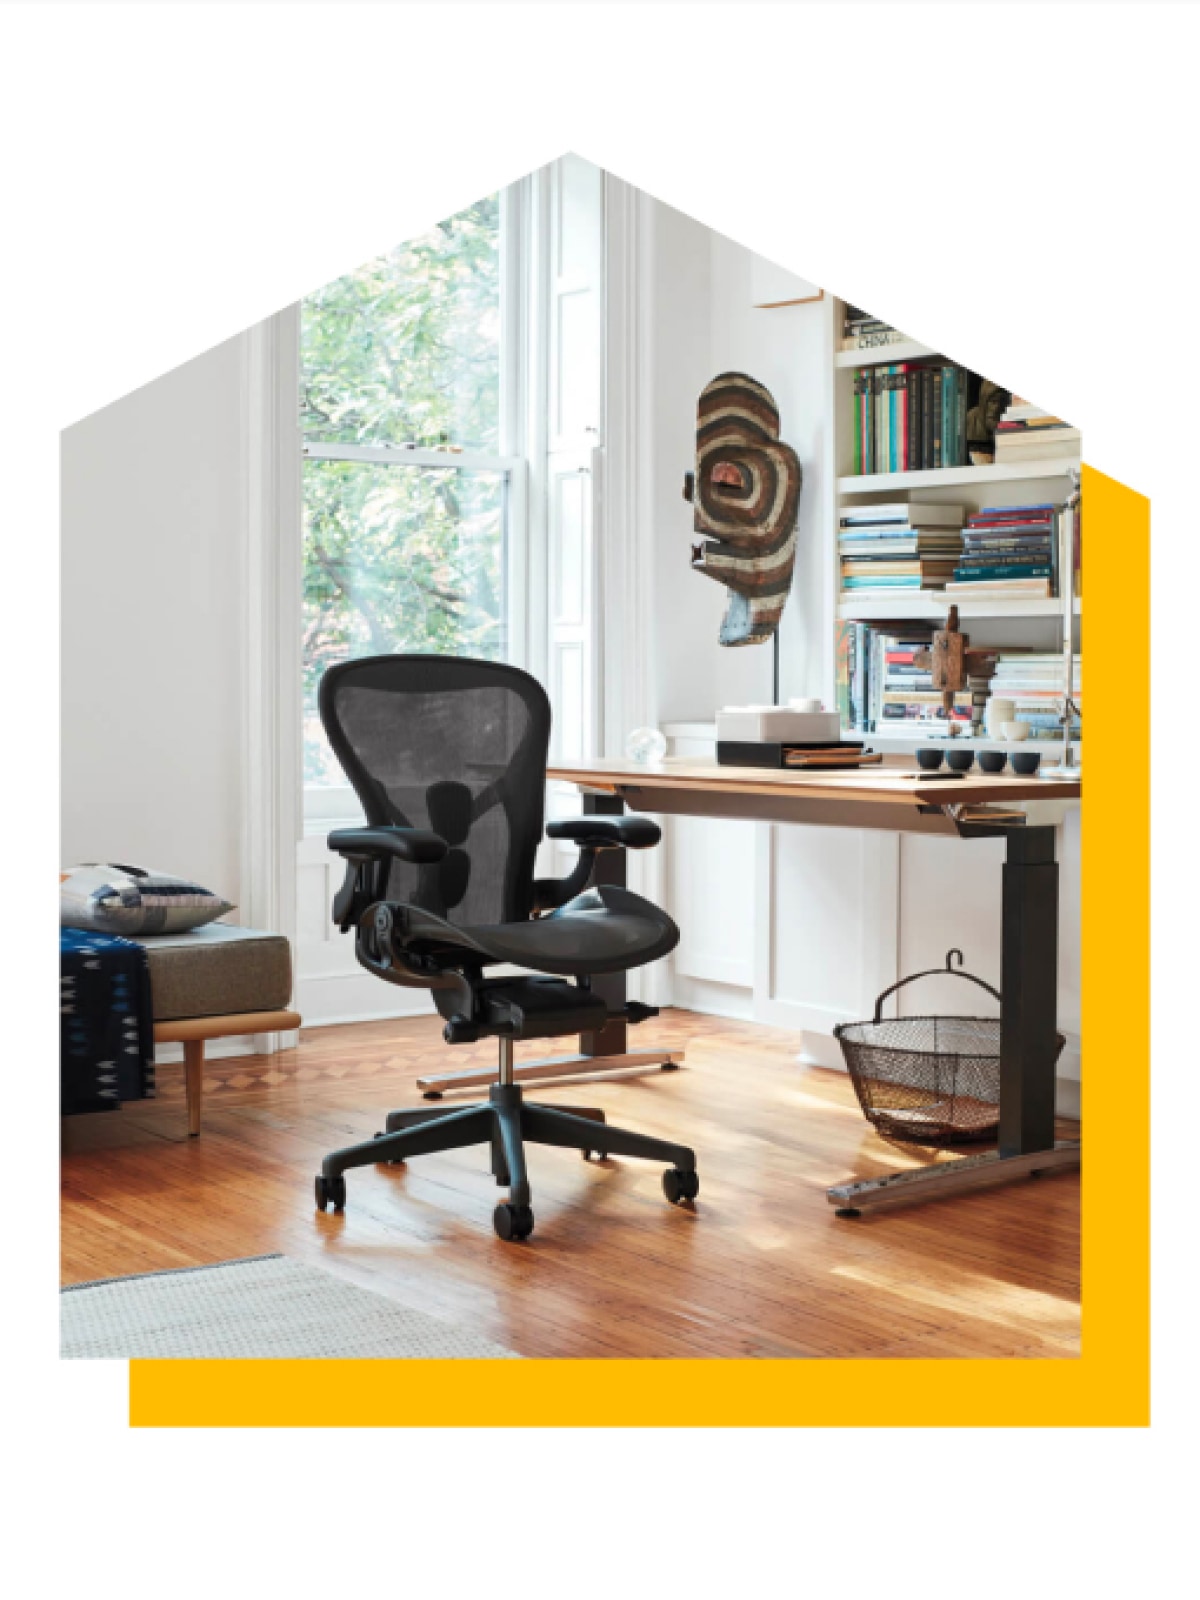 Graphite Aeron chair next to a sit-to-stand desk. Image has been modified into a shape of a house and has a bright yellow drop shadow behind it.